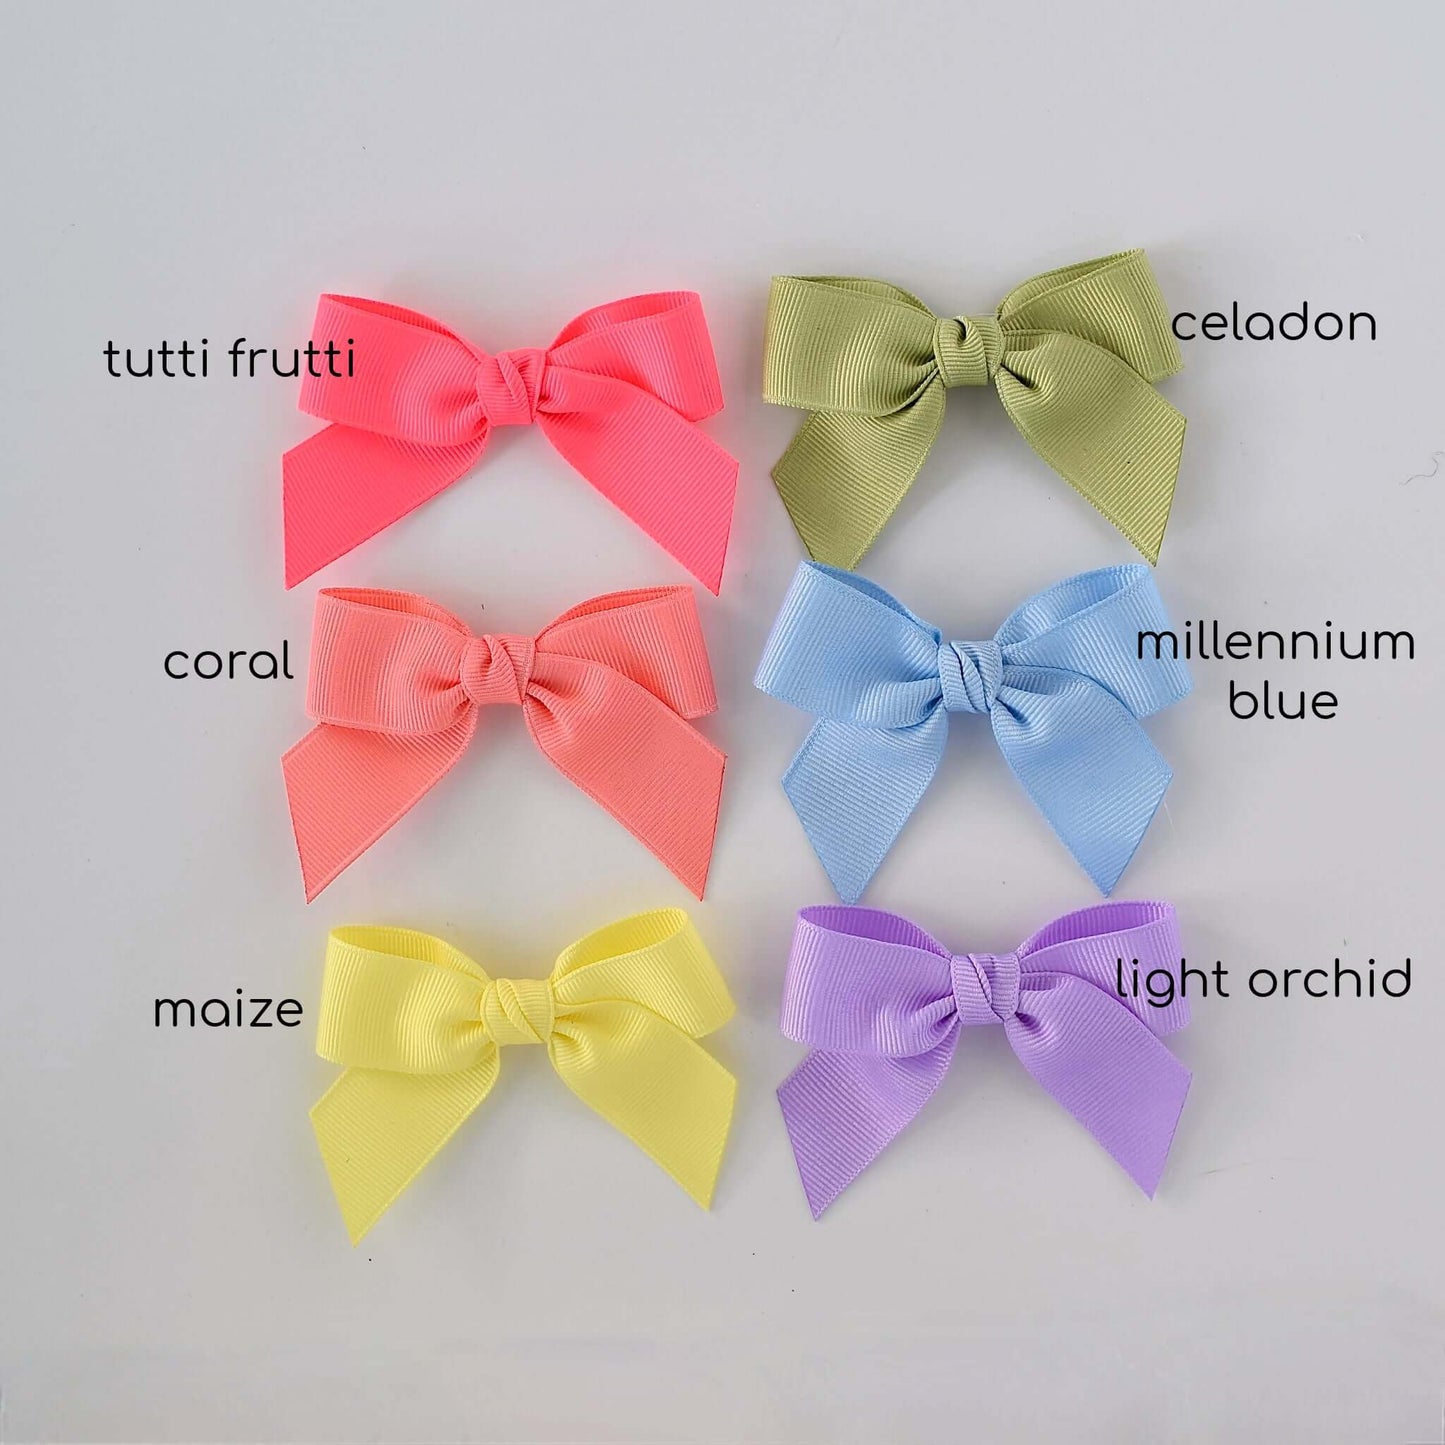 Six pastel-colored grosgrain Sailor bow clips in tutti frutti, celadon, coral, millennium blue, maize, and light orchid arranged together.